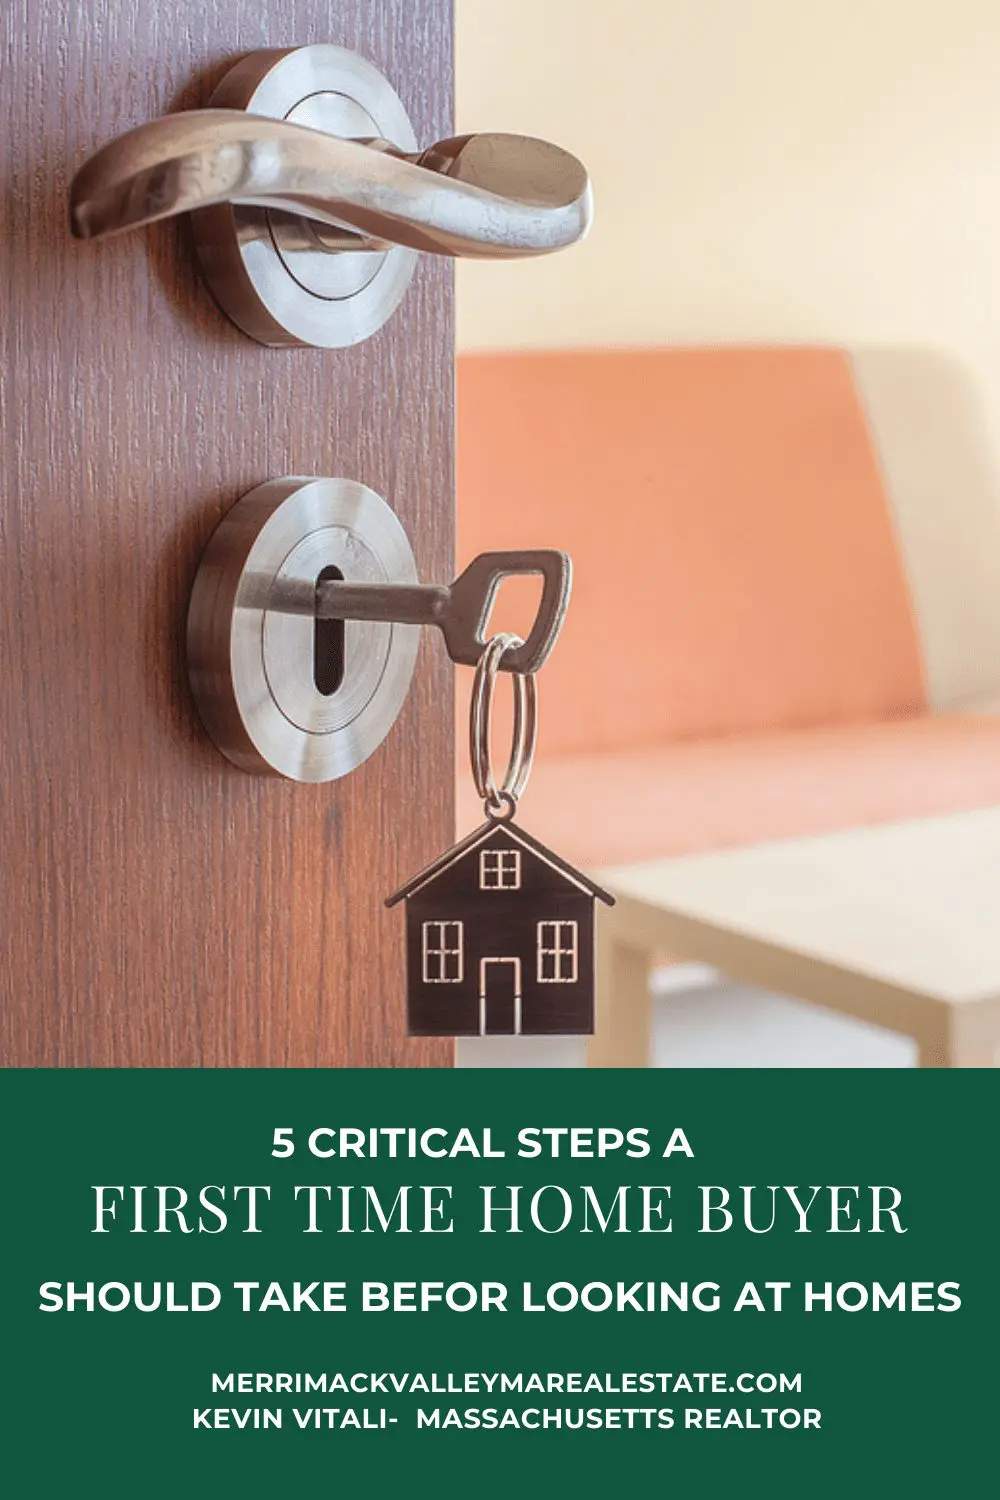 First Time Buyers  The Essentials You Need For Your First Home - Miller  Metcalfe